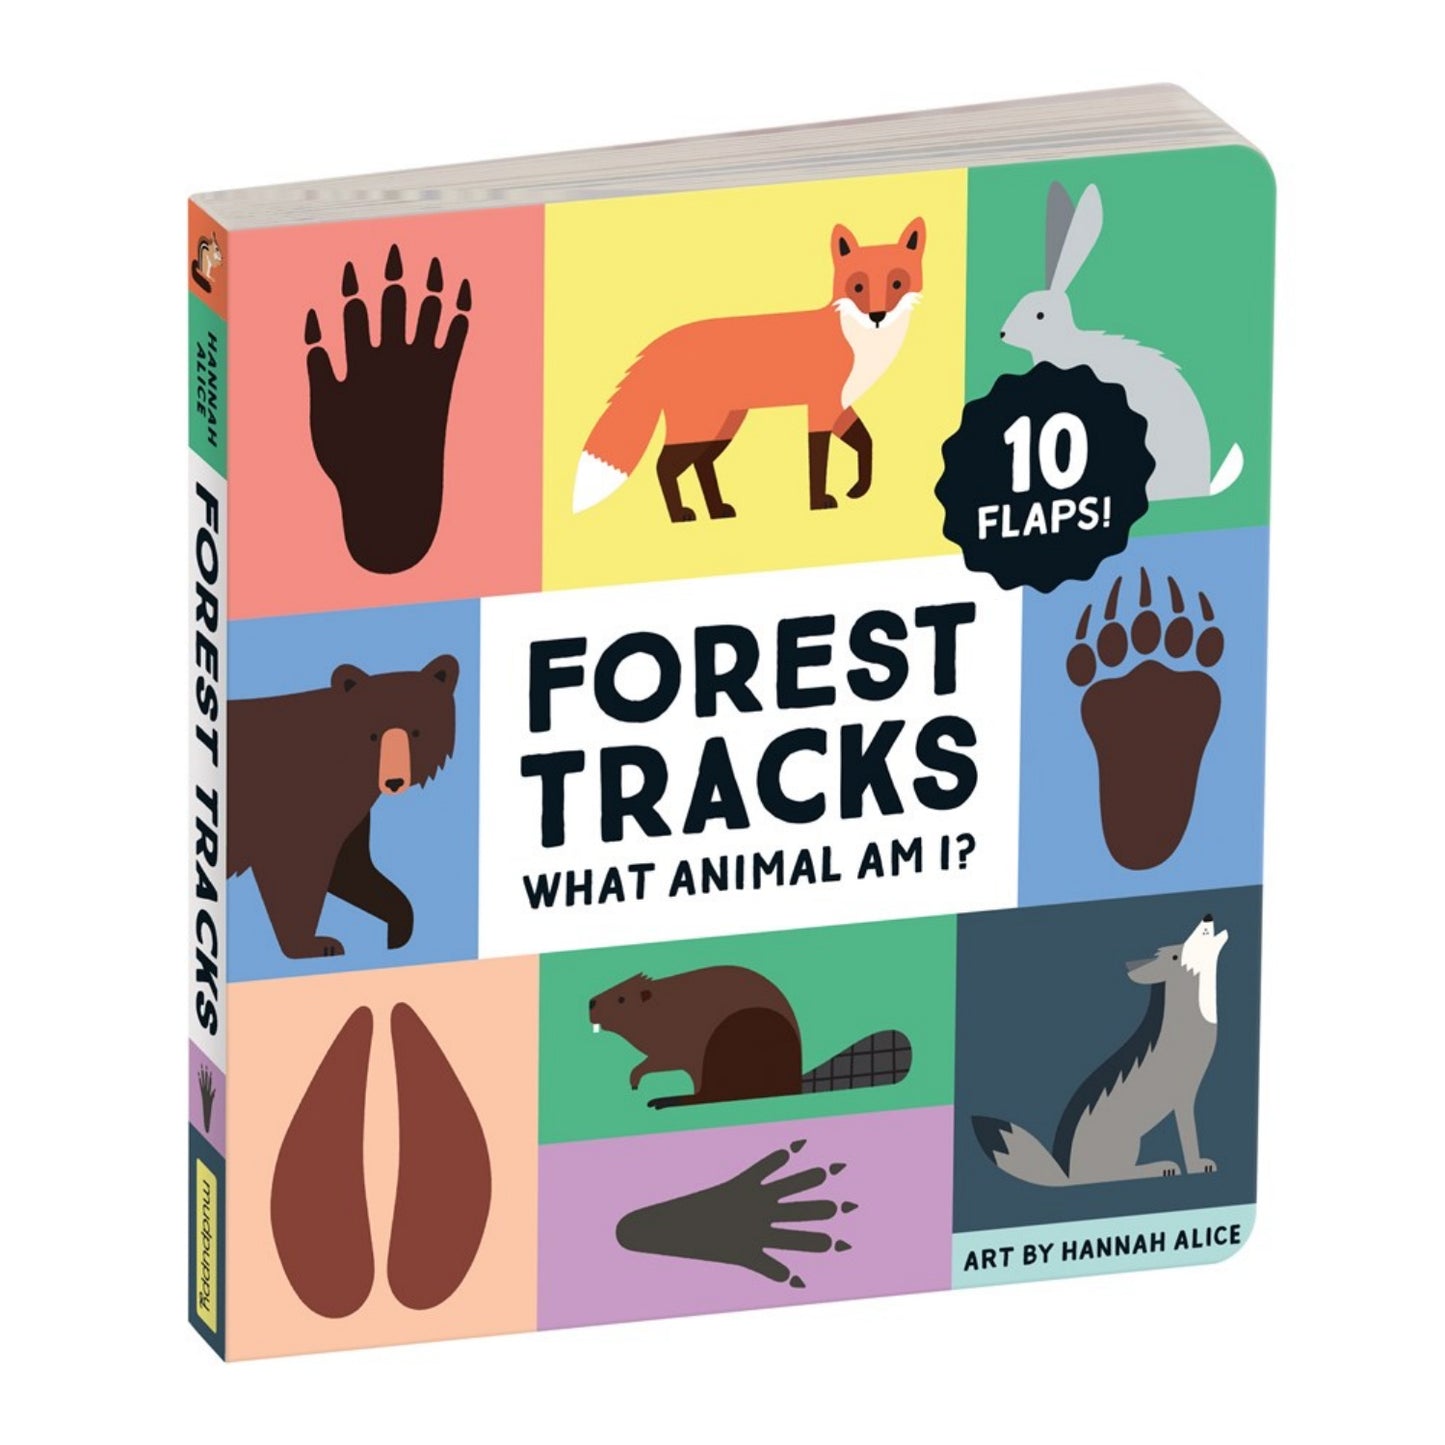 Forest Tracks: What Animal Am I? | Lift-the-Flap Board Book on Nature